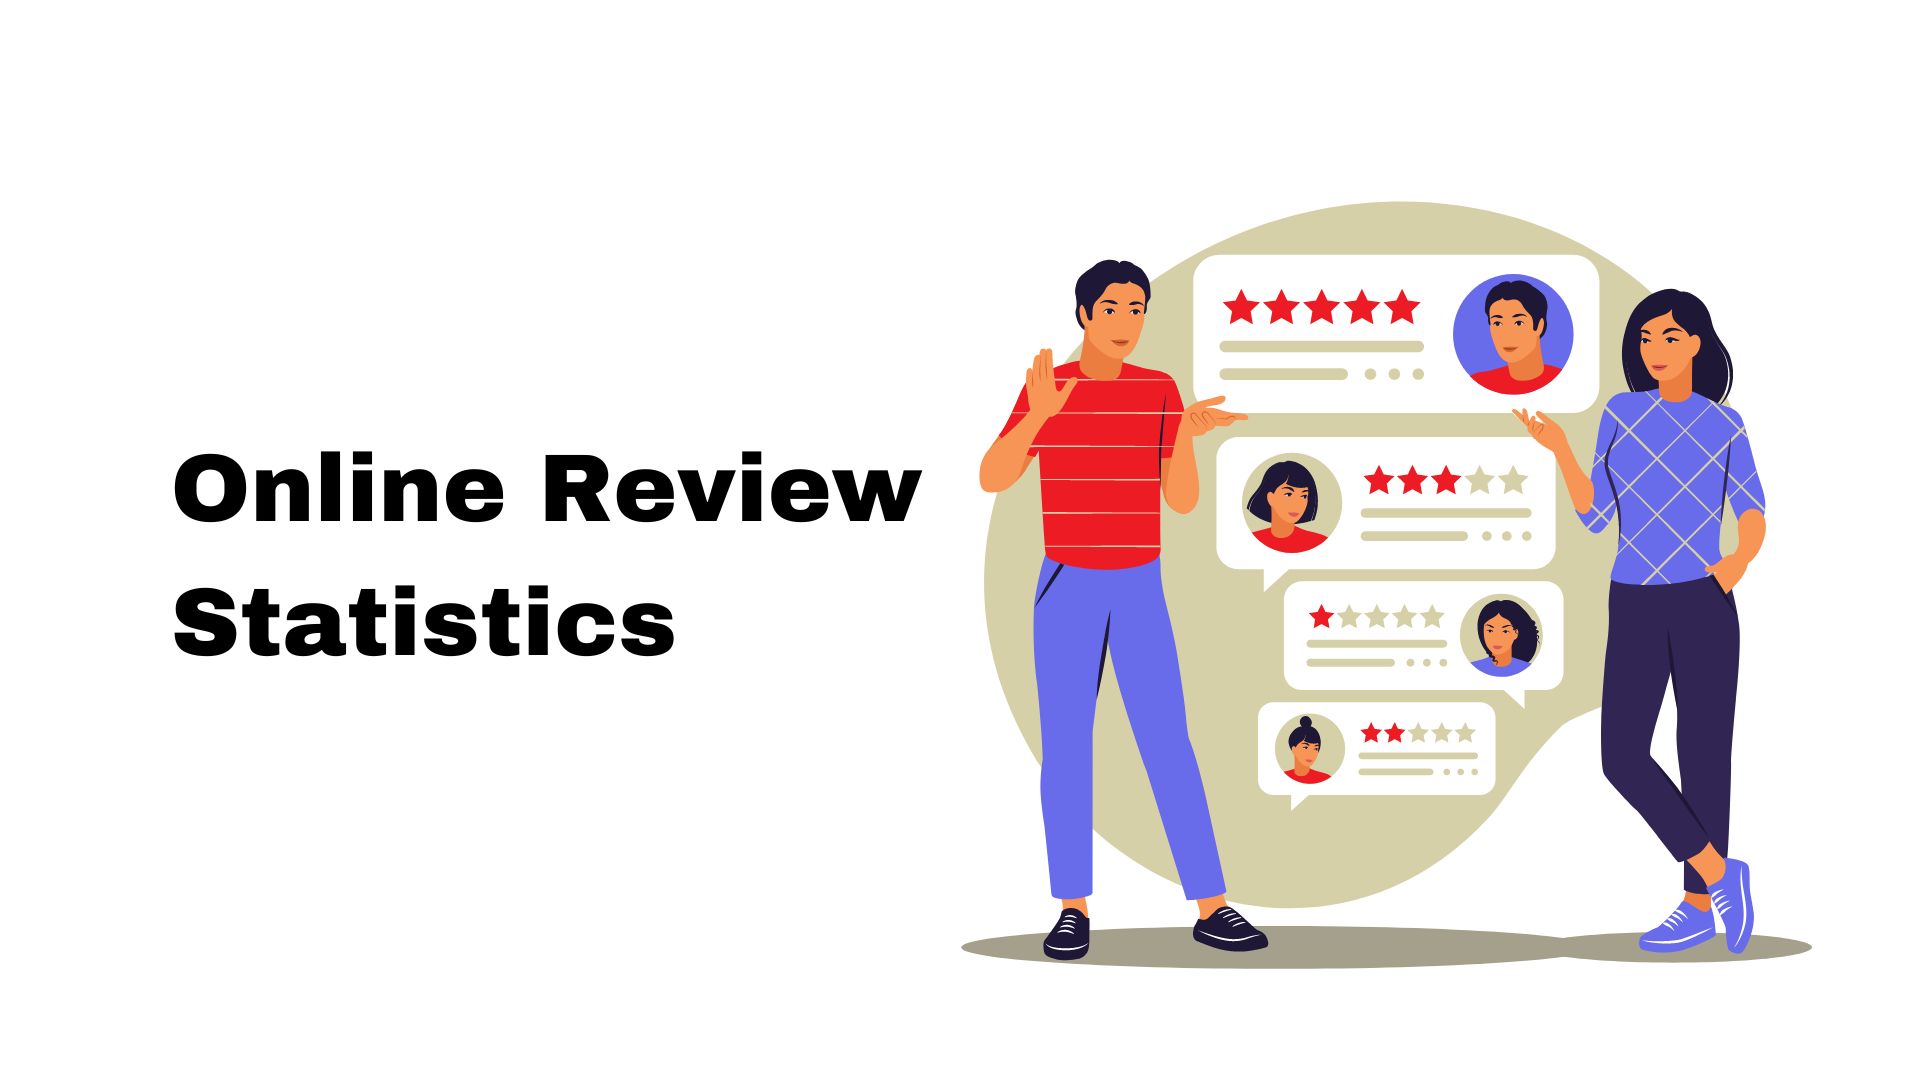 Online Review Statistics By Users, Age and Facts